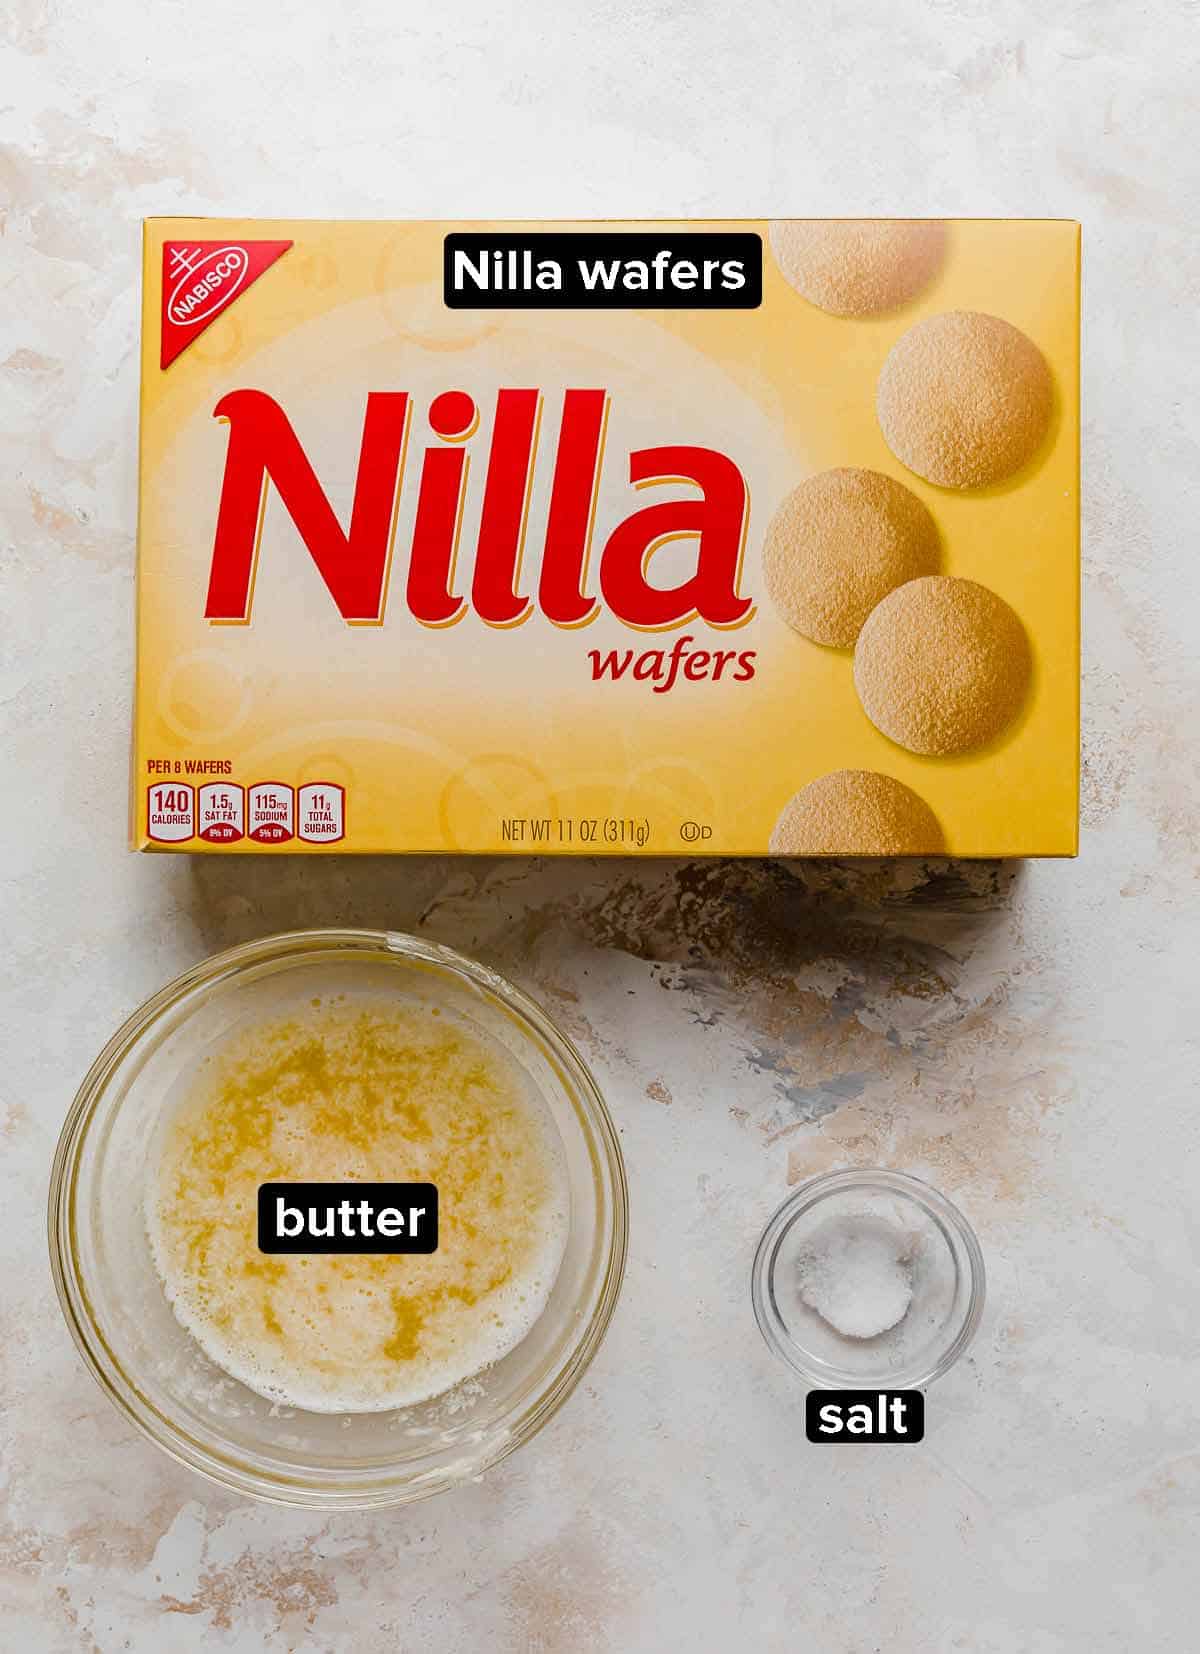 Nilla wafer box, melted butter, and salt on a white textured background.